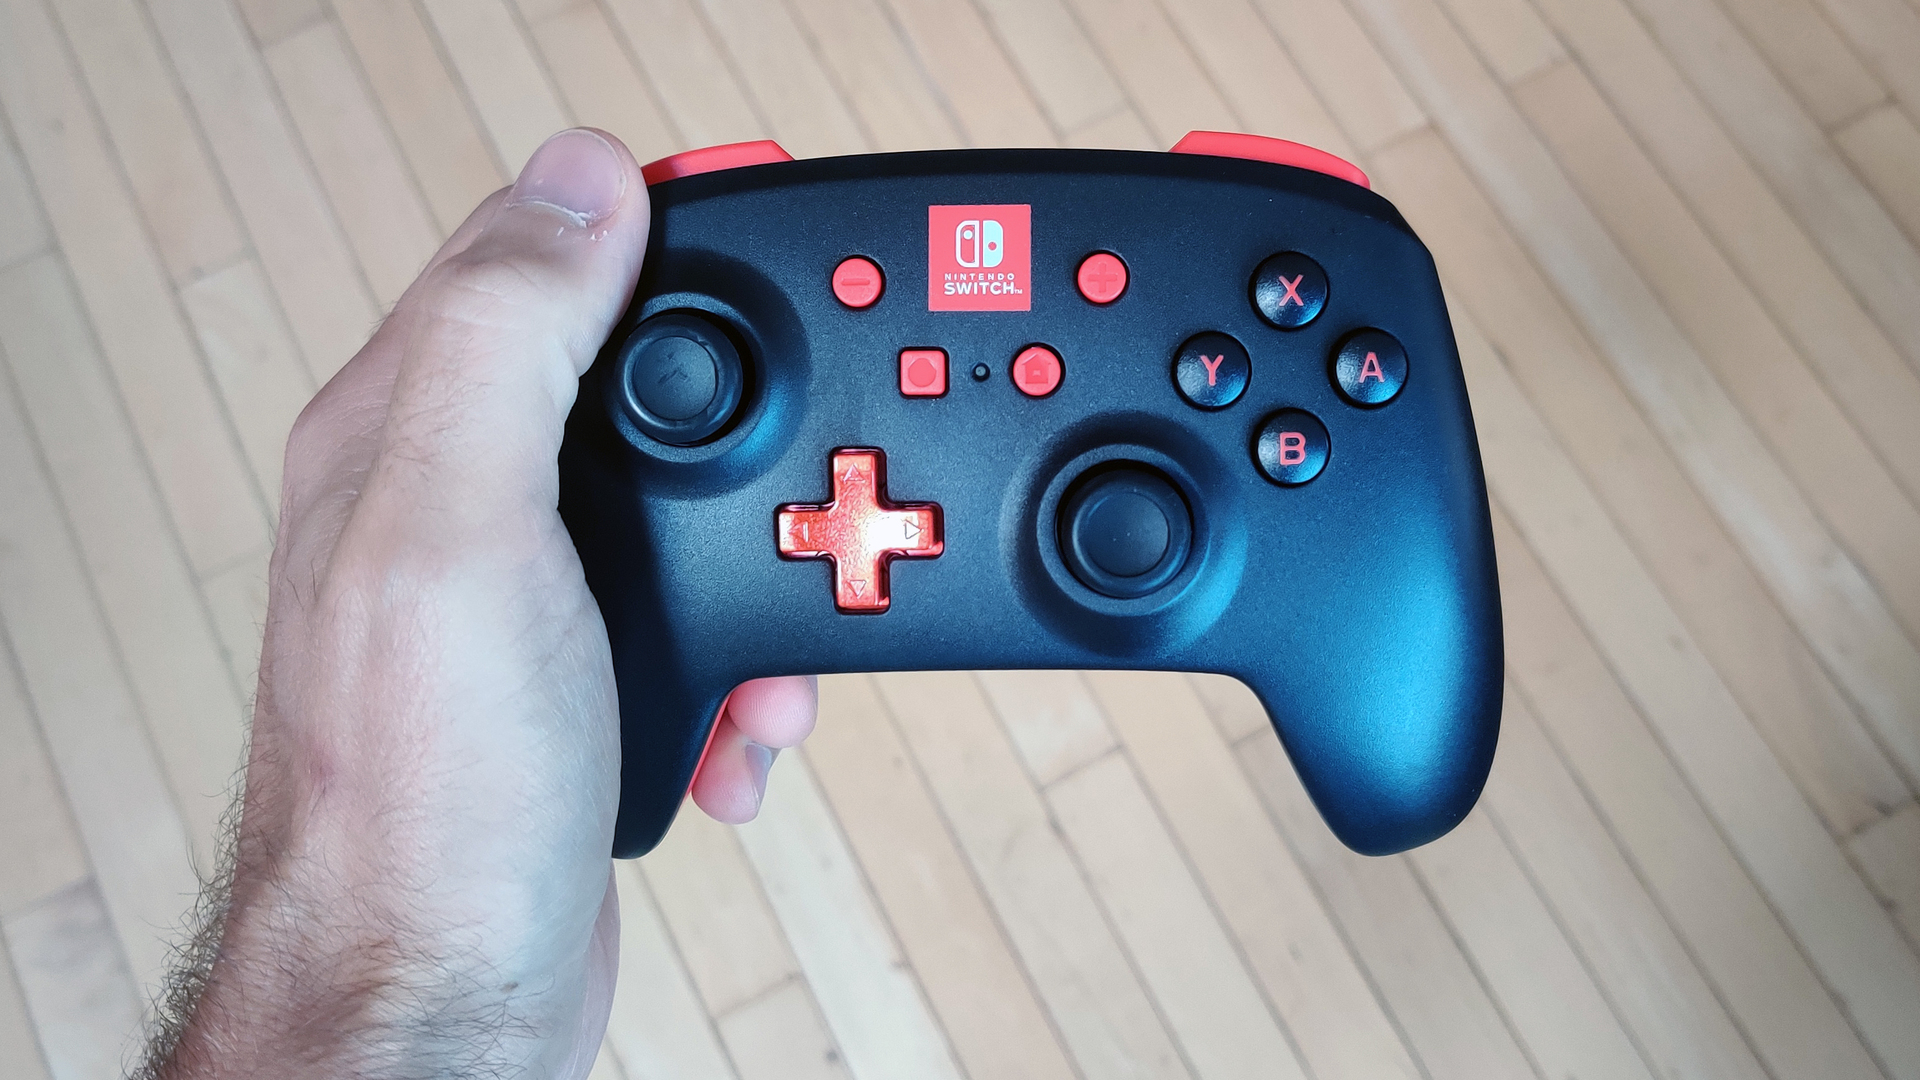 PowerA Enhanced Wireless Controller for Nintendo Switch in hand